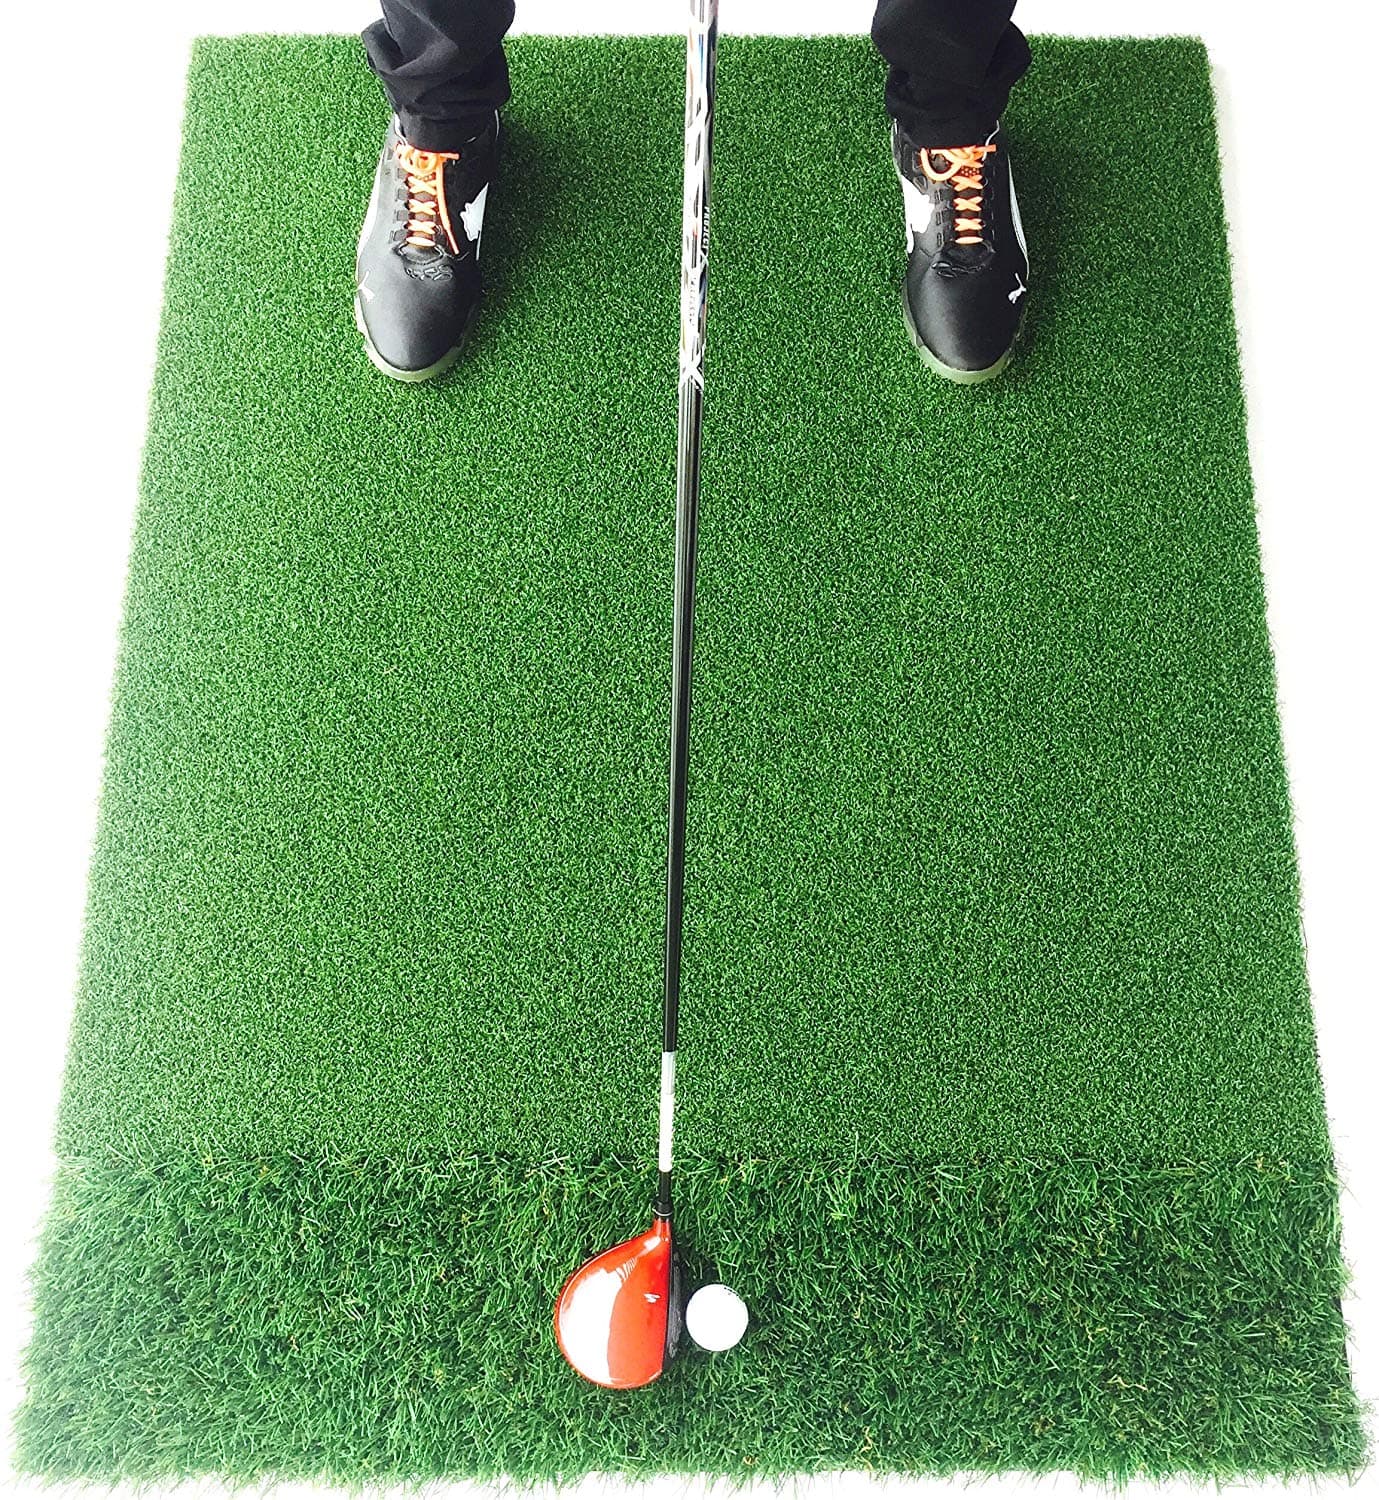 Best Golf Hitting Mats Of 2021 For Perfect Practice Shots (MUST READ